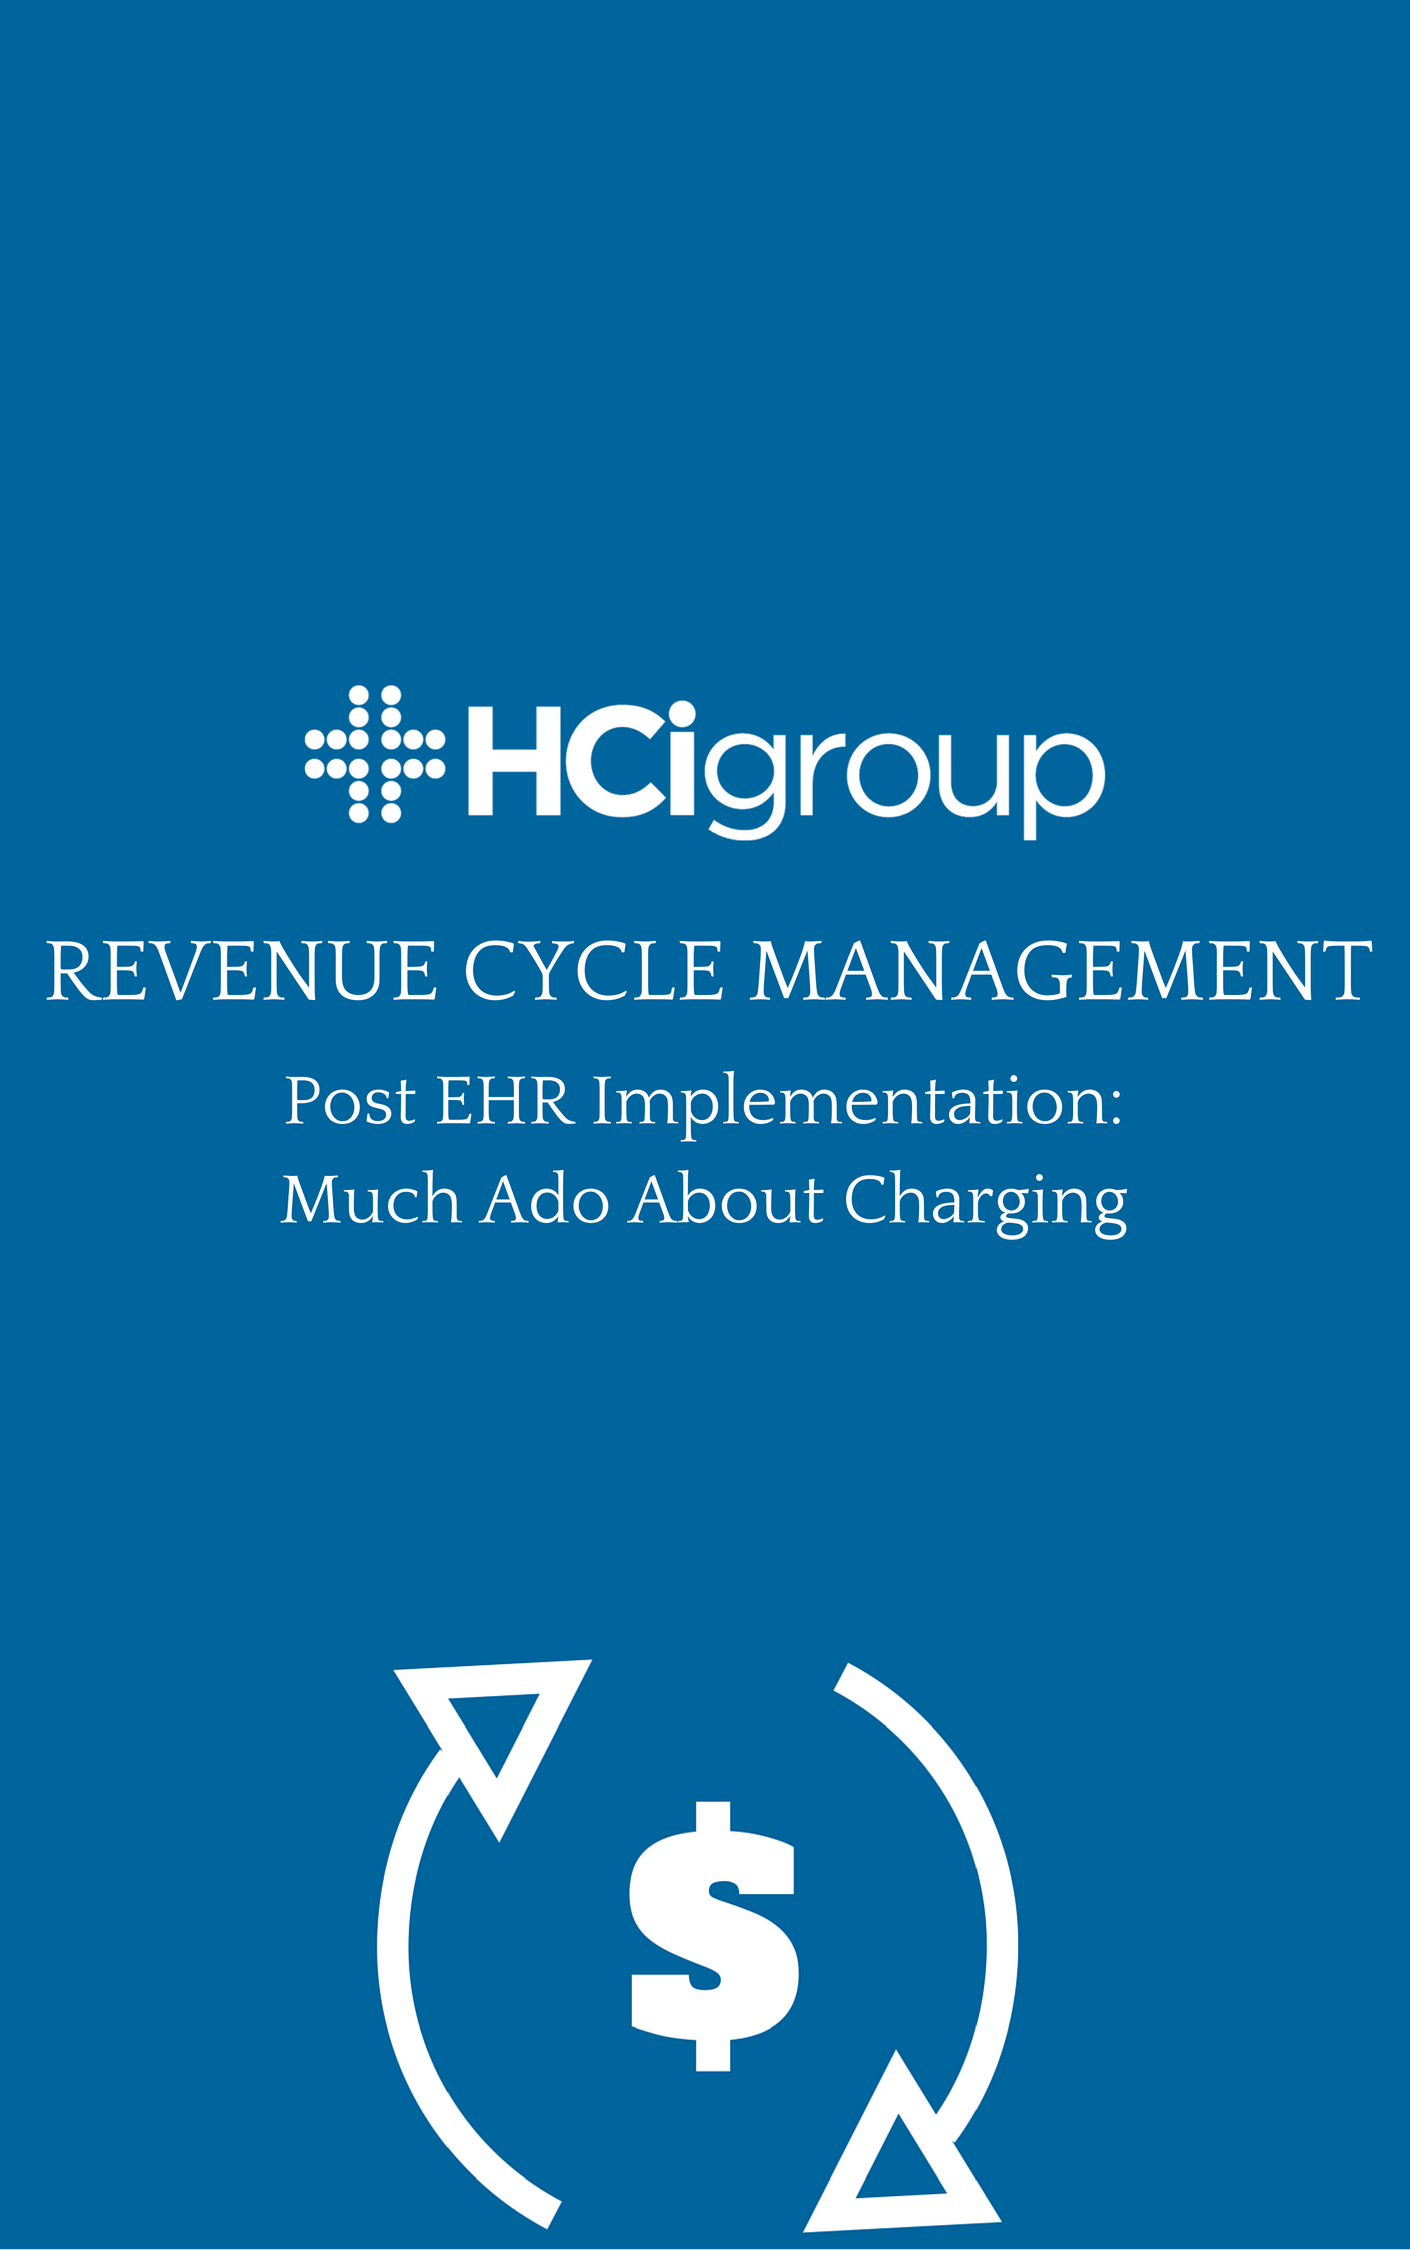 Revenue Cycle Management (RCM) Post EHR Implementation: Much Ado About Charging